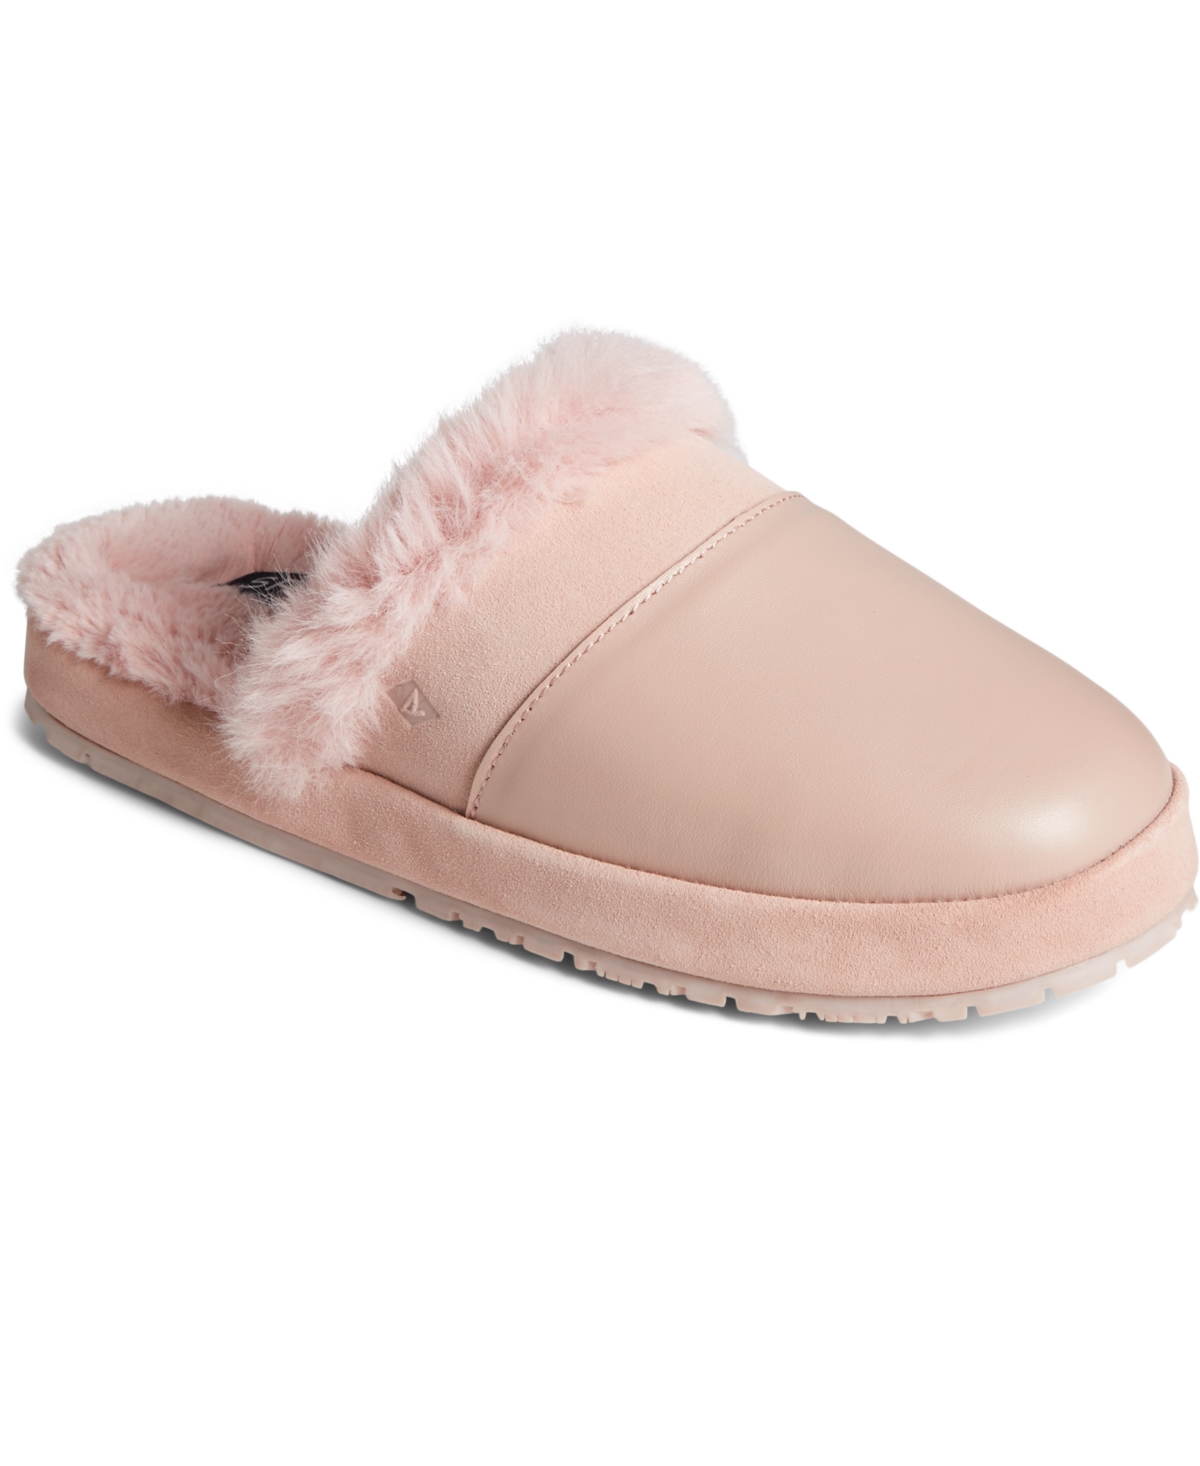 Women's Cape May Mule Slippers - Rose